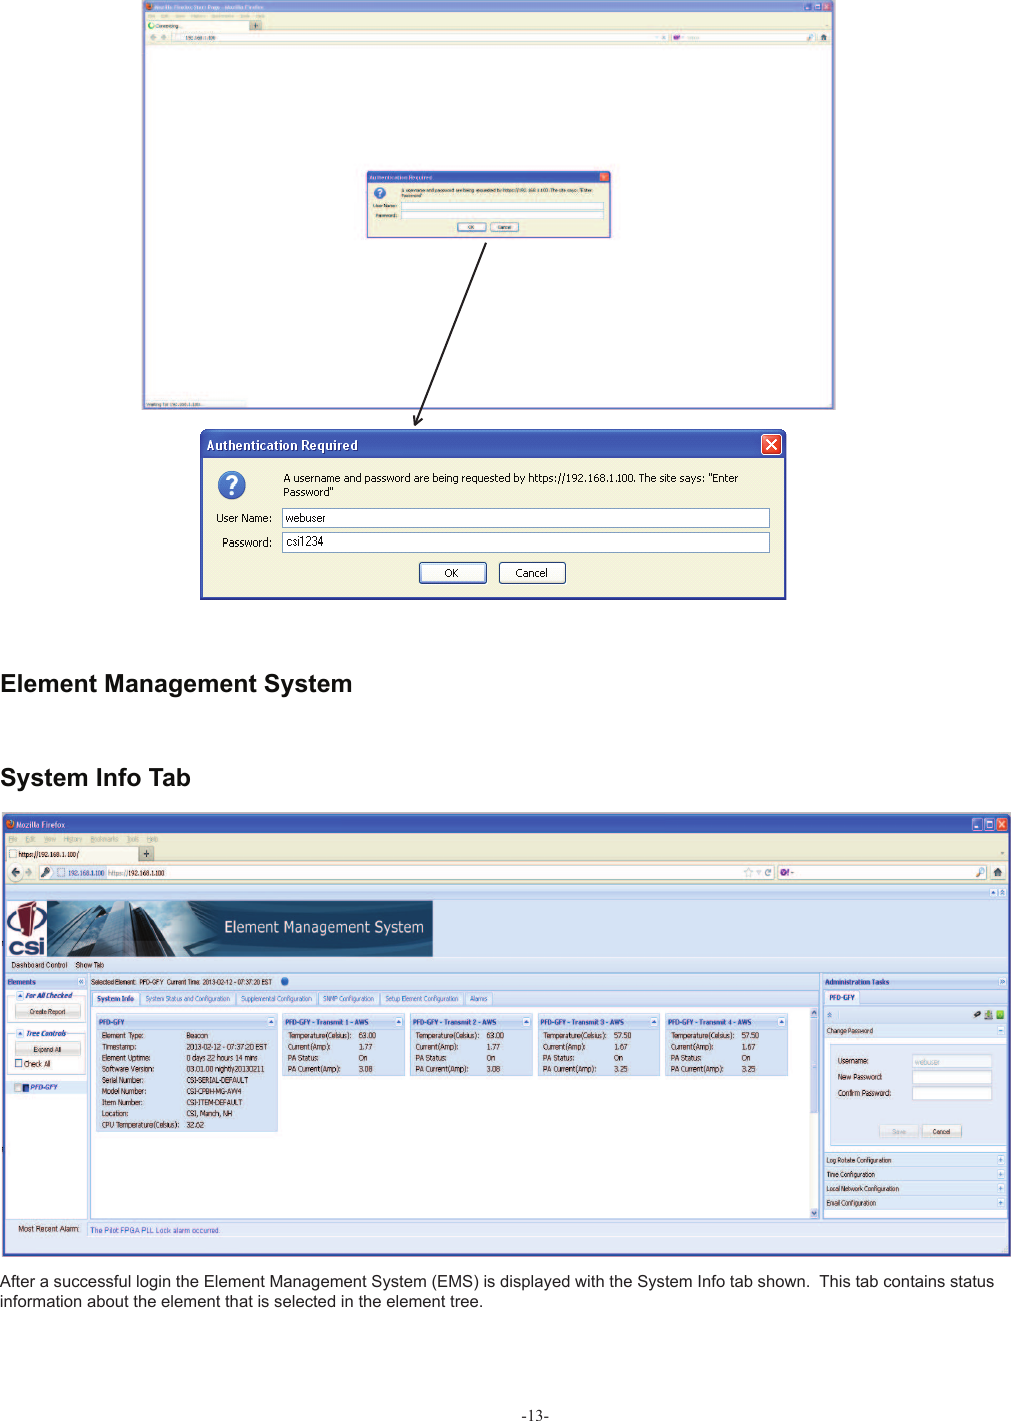 -13-After a successful login the Element Management System (EMS) is displayed with the System Info tab shown.  This tab contains status information about the element that is selected in the element tree. Element Management System System Info Tab